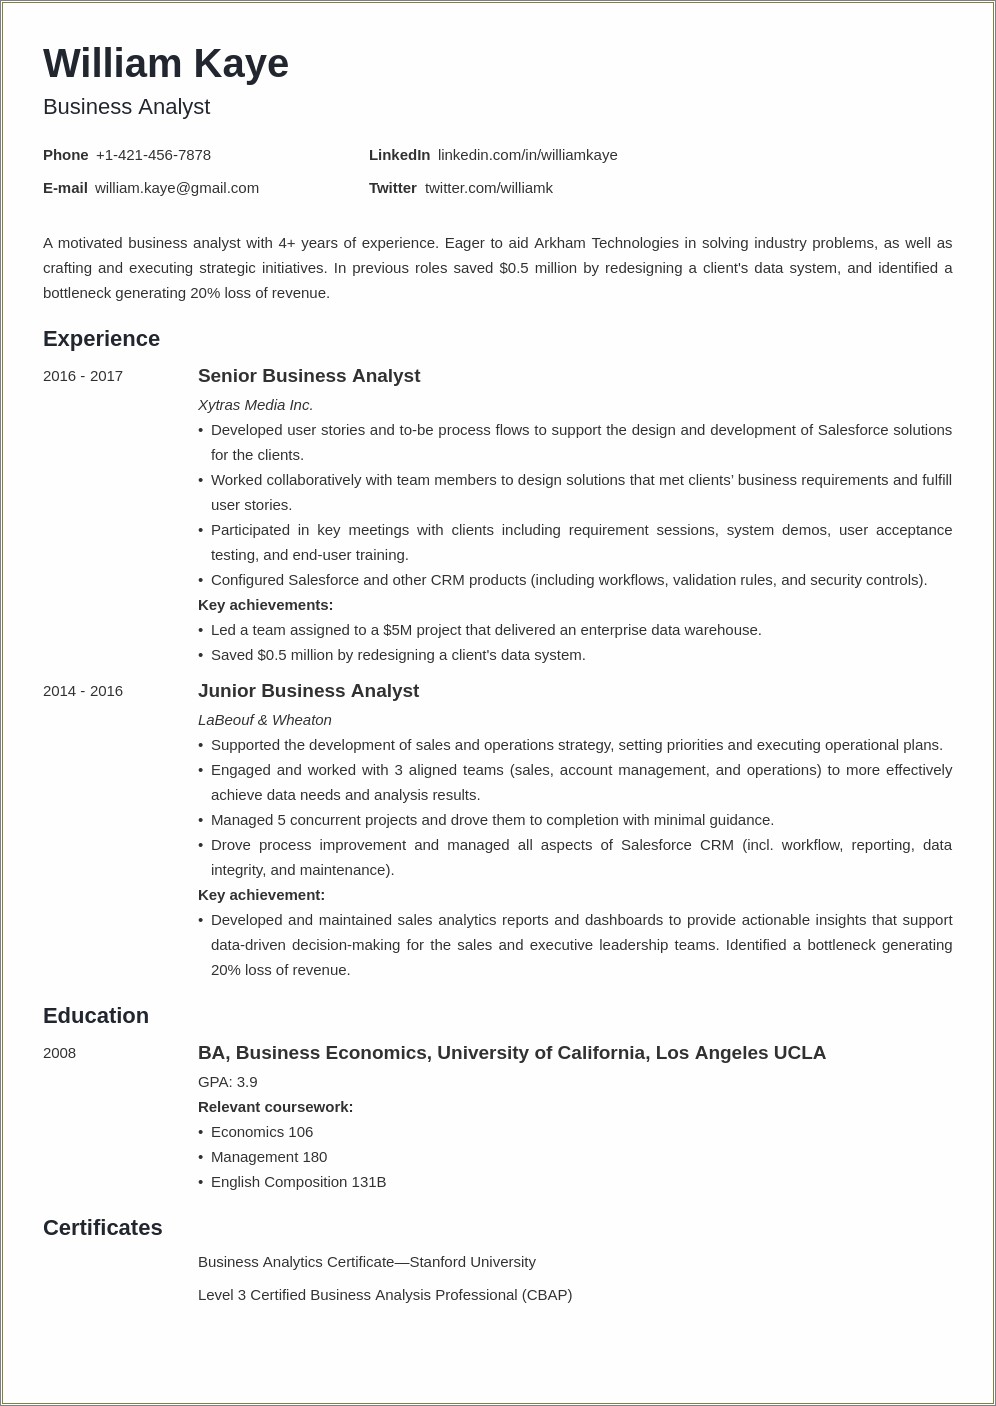 Business Analyst 10 Years Experience Resume